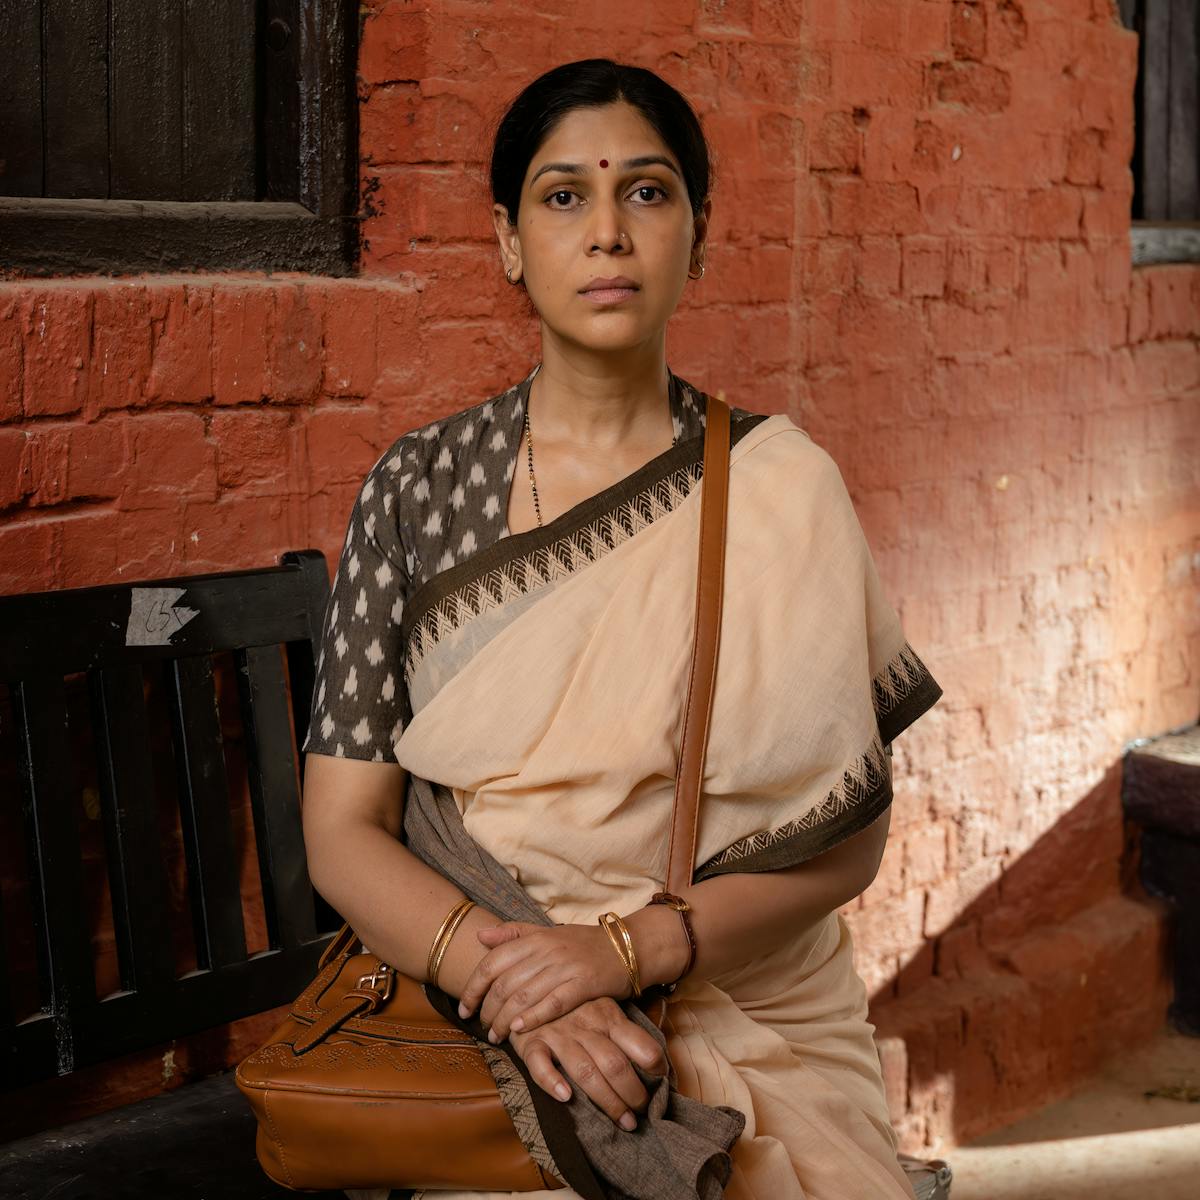 Sakshi Tanwar looks directly at the camera. behind her is a brick wall.